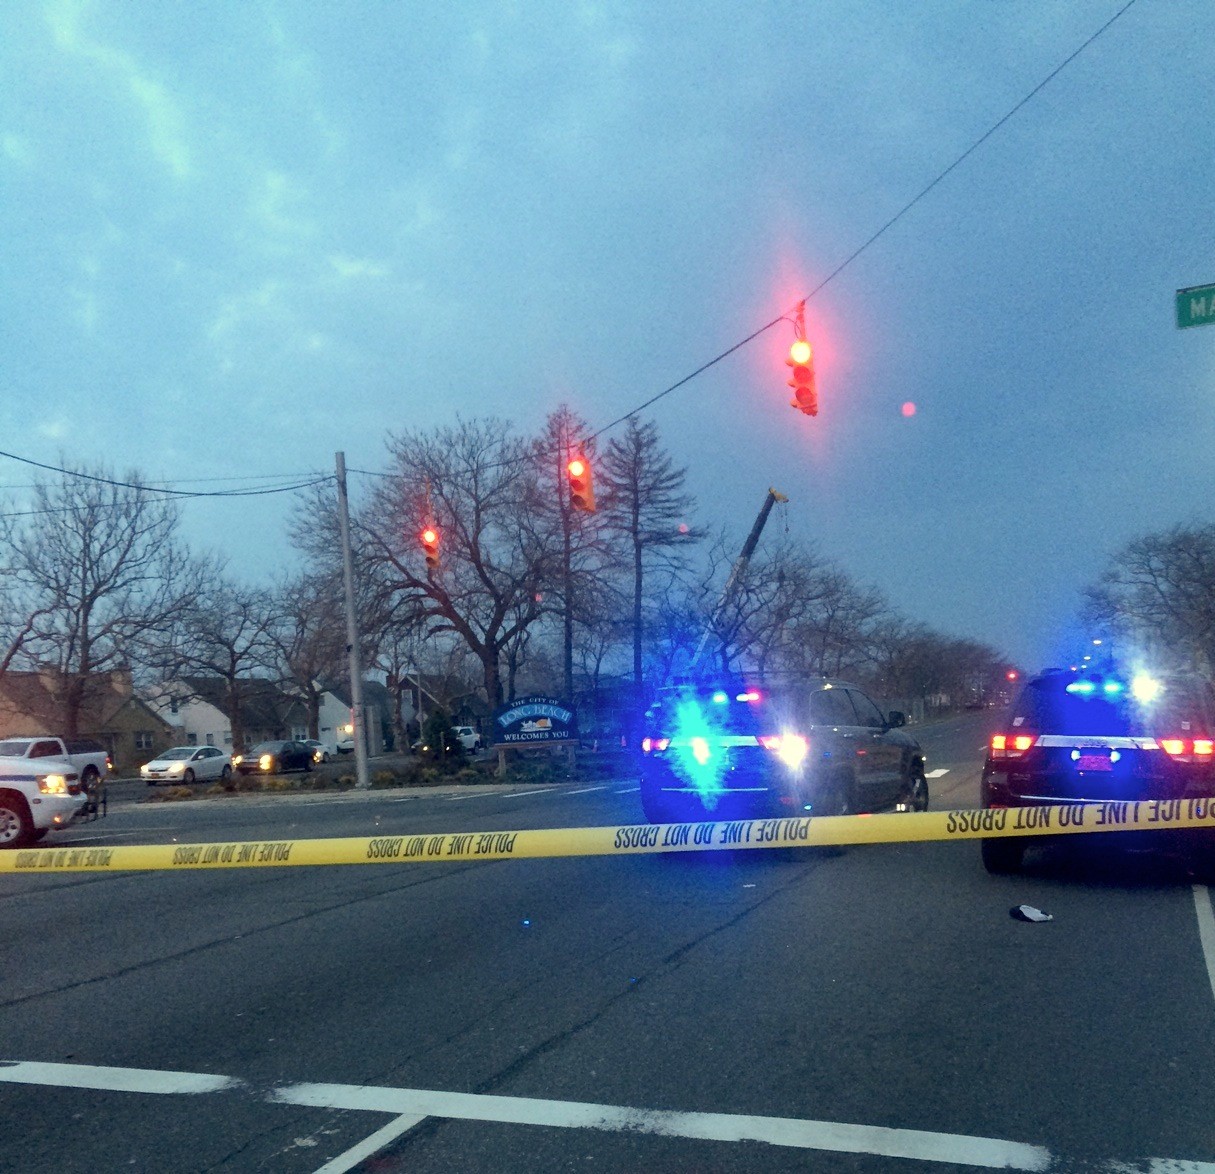 Police said a man was struck and killed just before 6 a.m. on Friday.